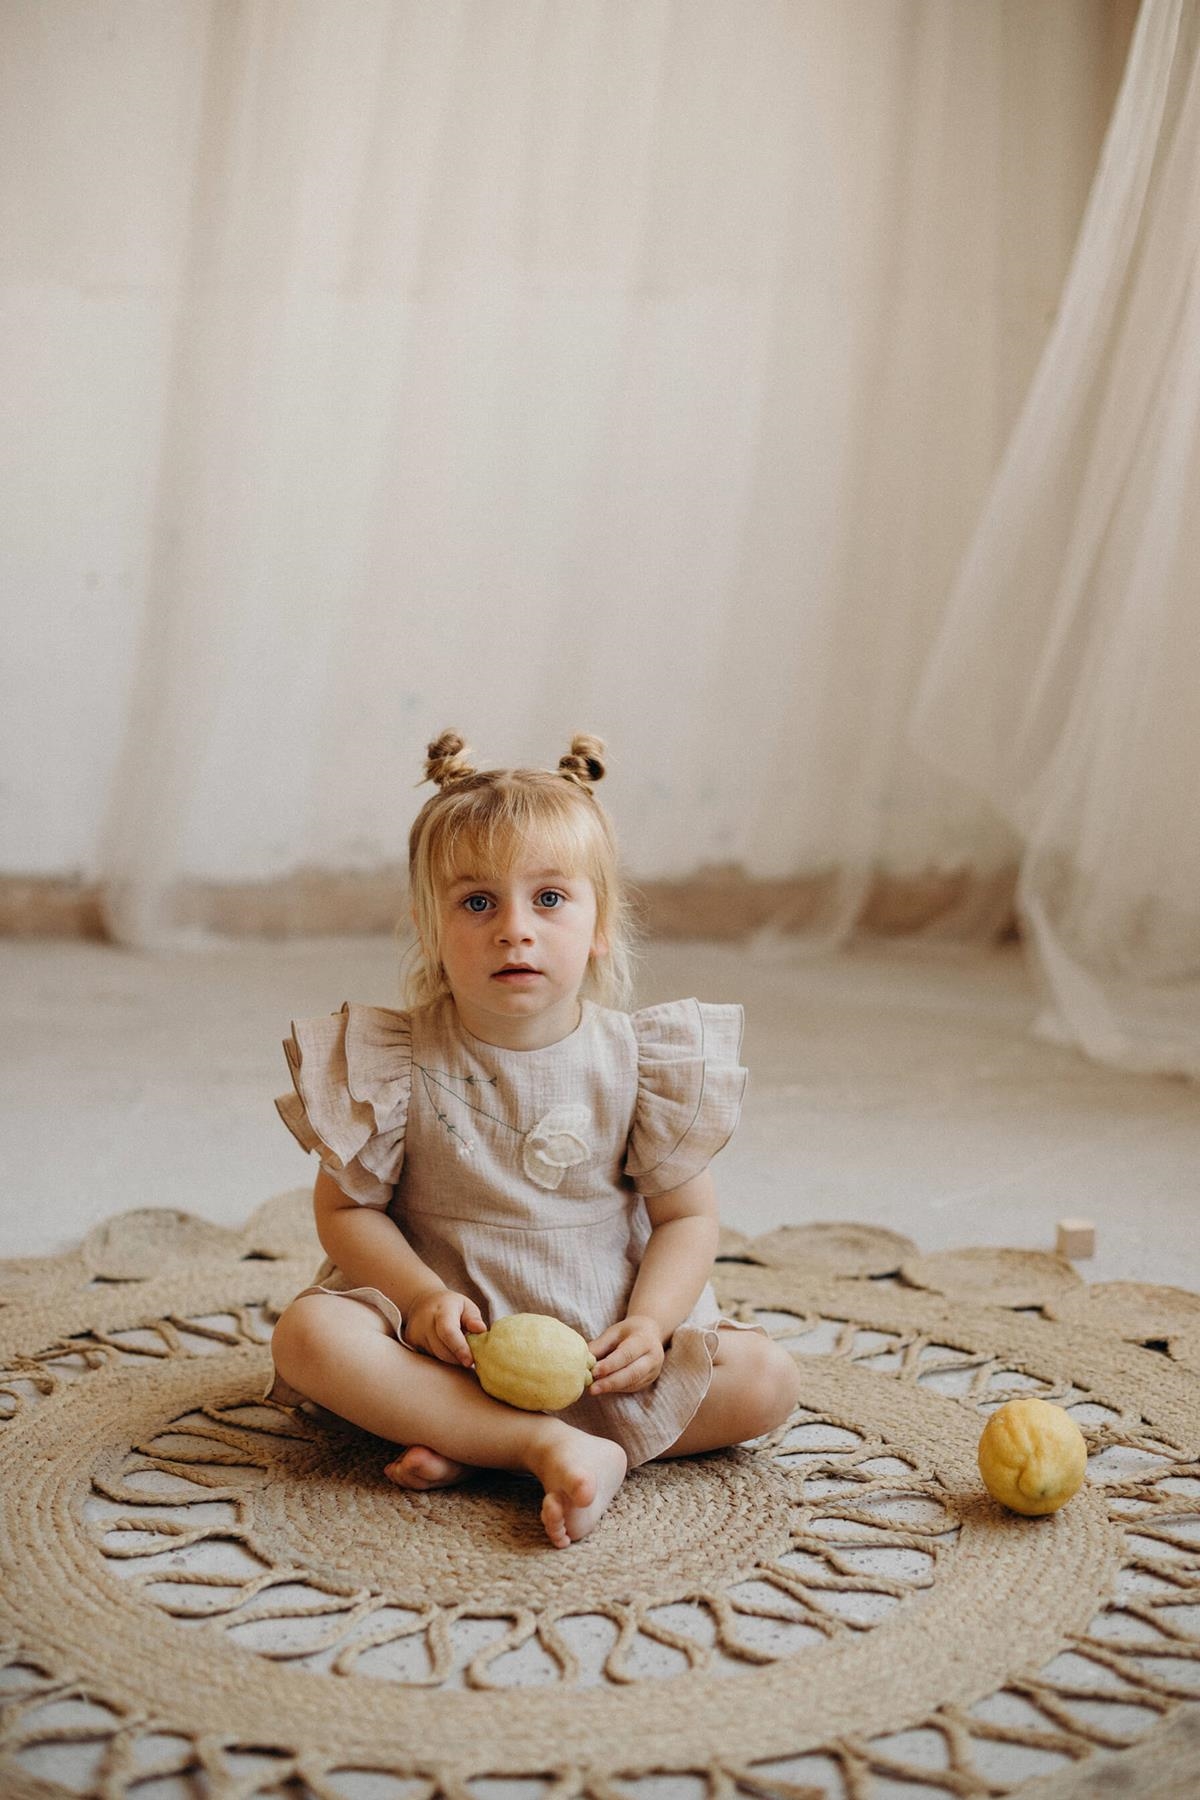 Mod.9.4 Organic sand romper suit with cape-style skirt | SS23 Mod.9.4 Organic sand romper suit with cape-style skirt